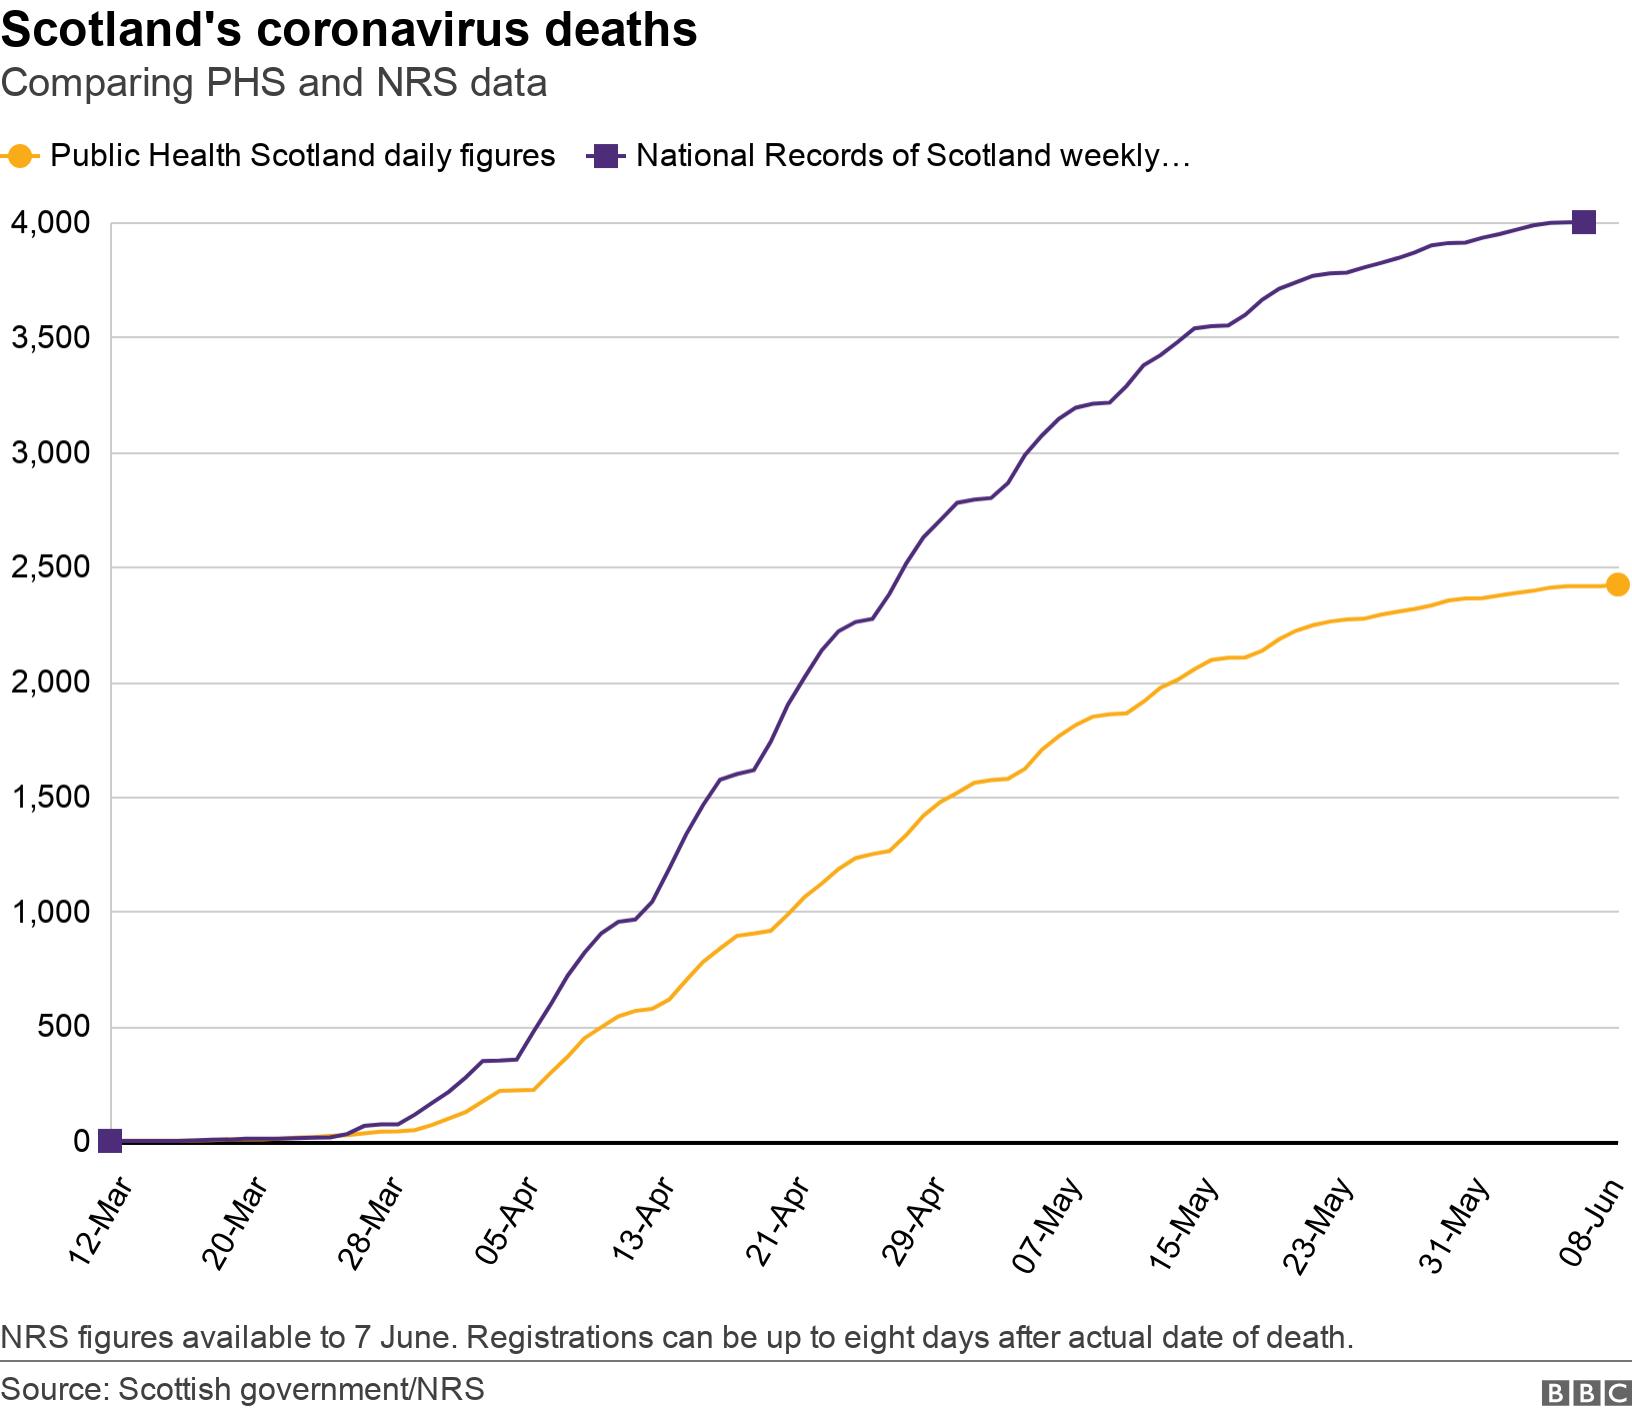 Scotland's coronavirus deaths. Comparing PHS and NRS data.  NRS figures available to 7 June. Registrations can be up to eight days after actual date of death..